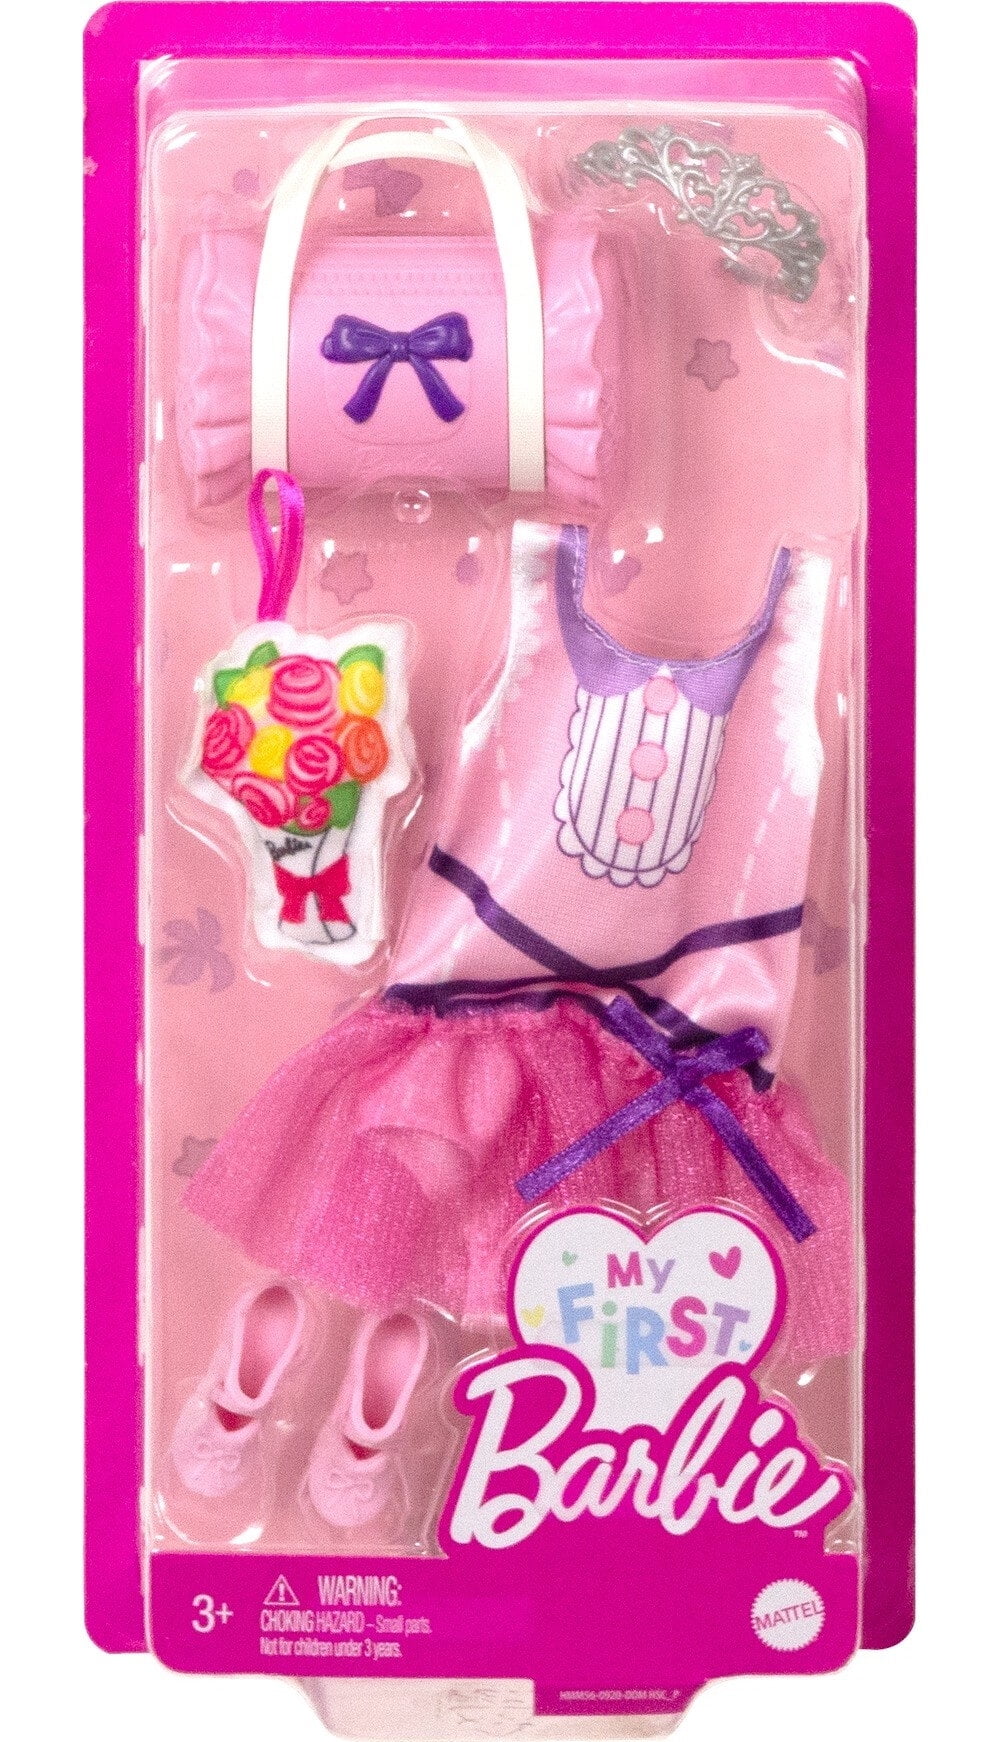 My First Barbie Fashion Pack, Preschool Doll Clothes with Bedtime Pajamas and Accessories, 13.5-inch